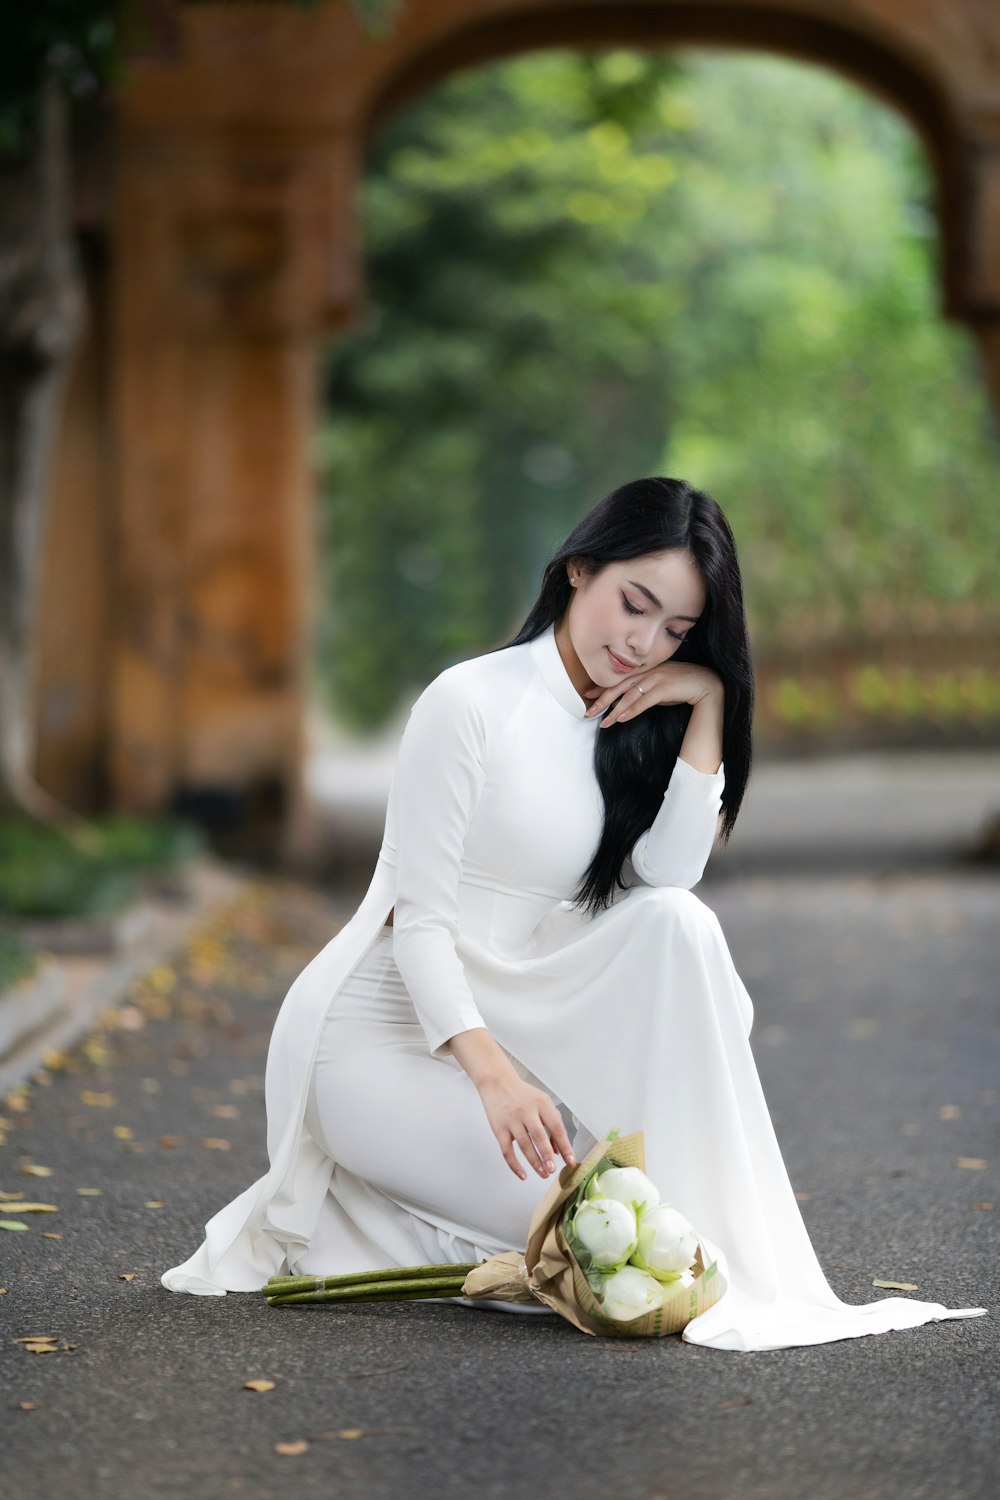 a woman kneeling down with a bouquet of flowers